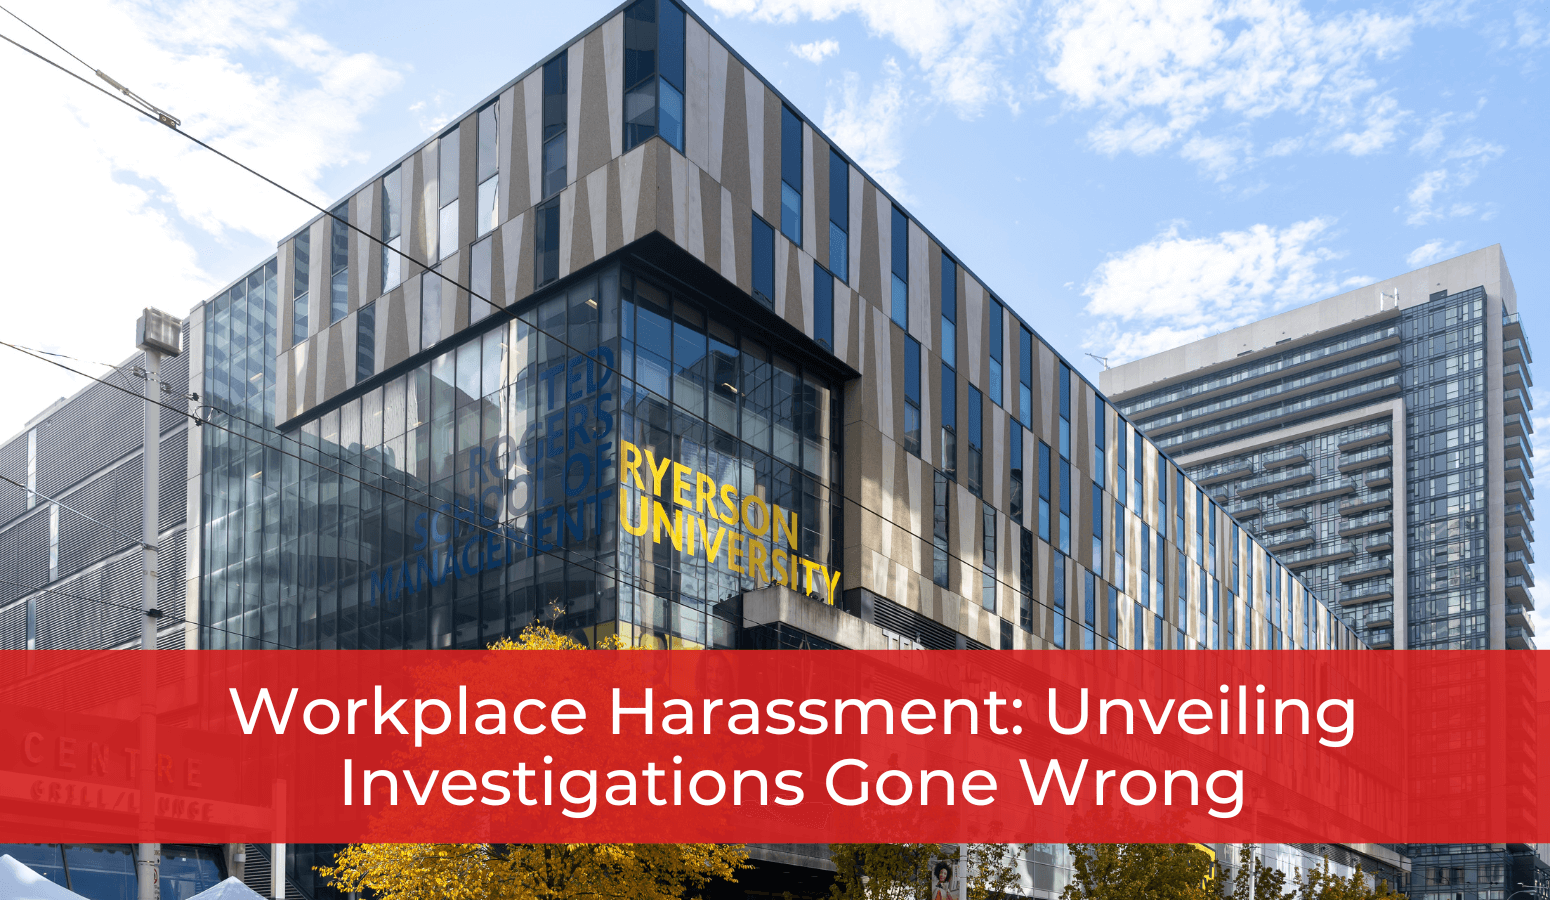 Featured image for “Workplace Harassment: Unveiling Investigations Gone Wrong”